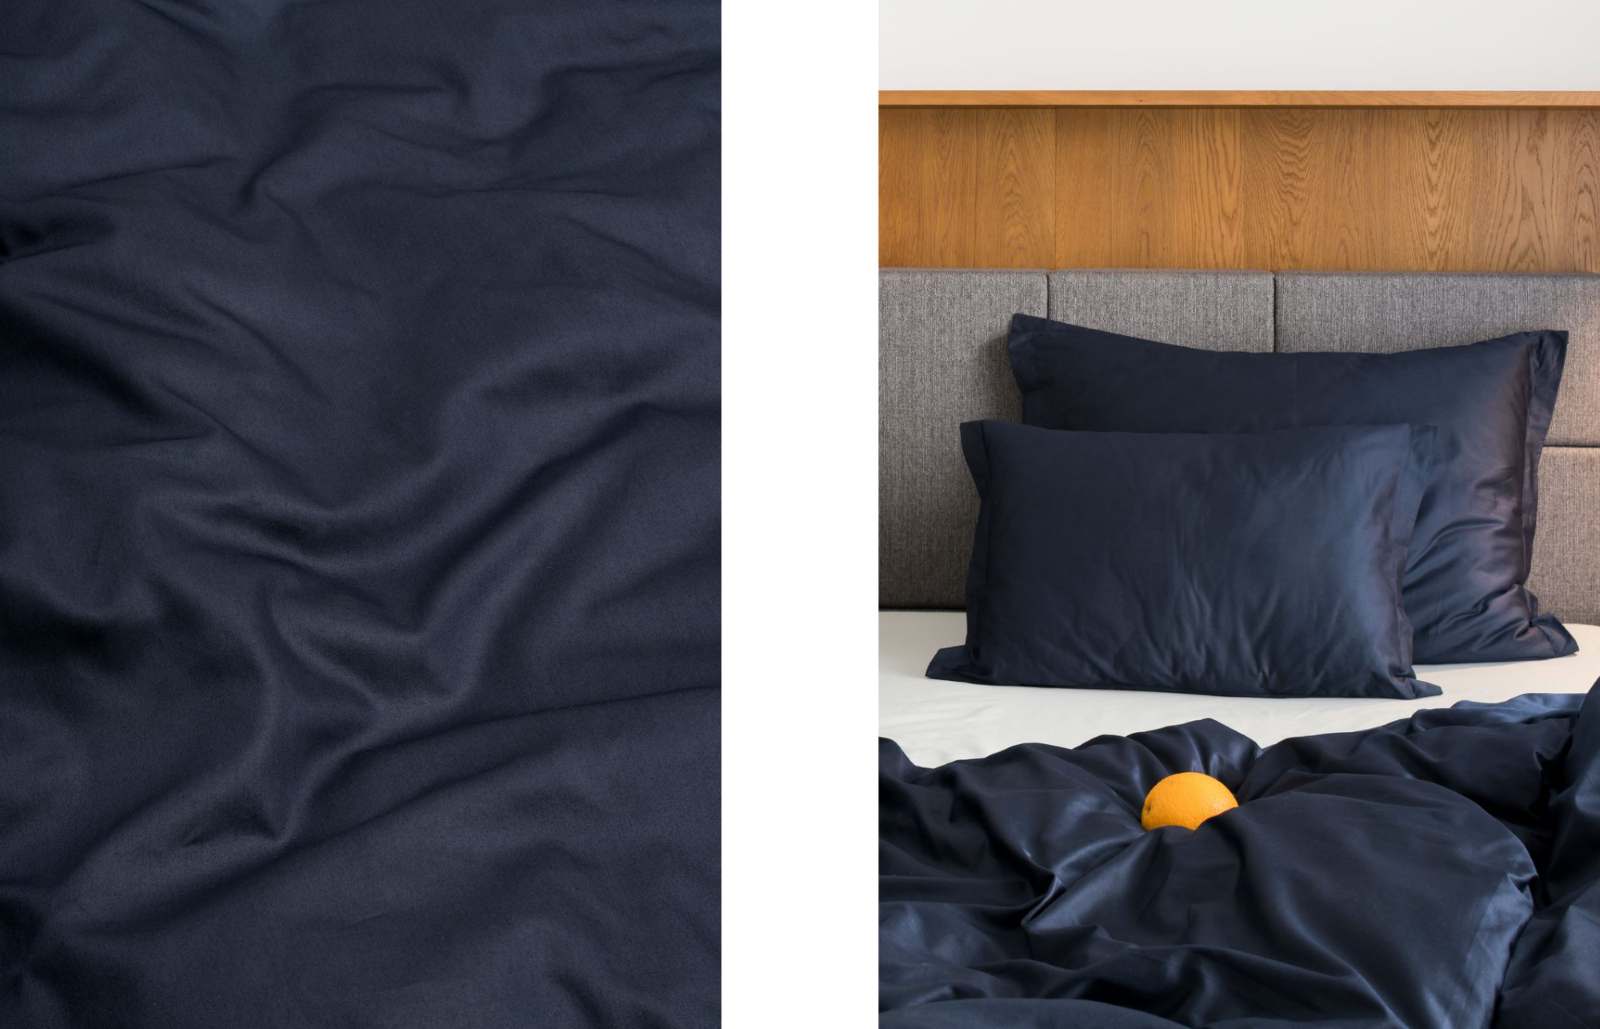 Our Midnight Diving bed linen and our Moody Blue bathrobe both feature the Pantone shade 19-4021 TPG.